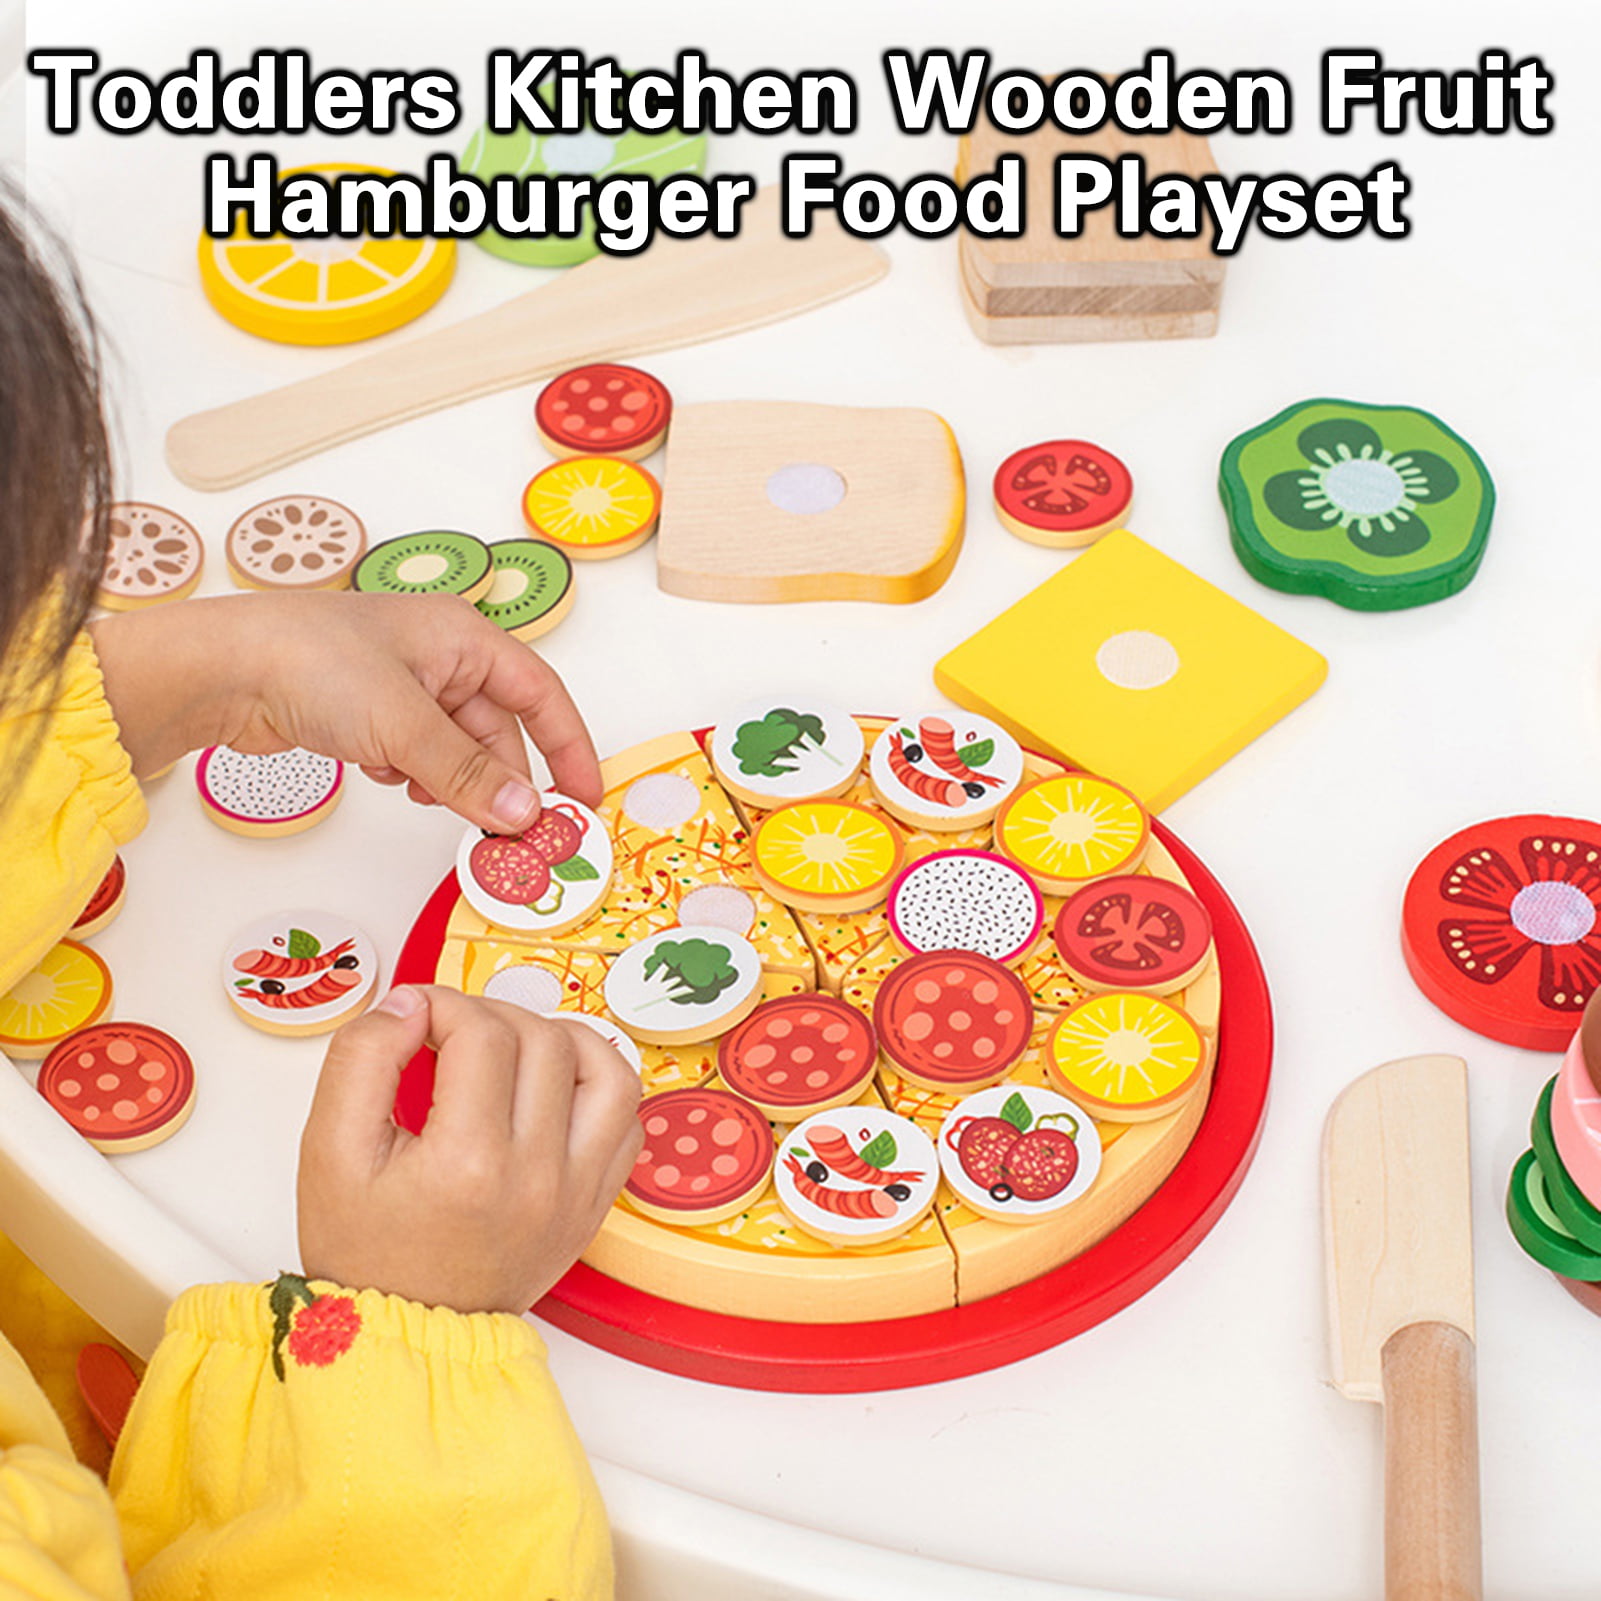 Baby Shelf Wooden Food Pizza simulation play for kids - Wooden Food Pizza  simulation play for kids . Buy Best toy for children to brain exercise toys  in India. shop for Baby